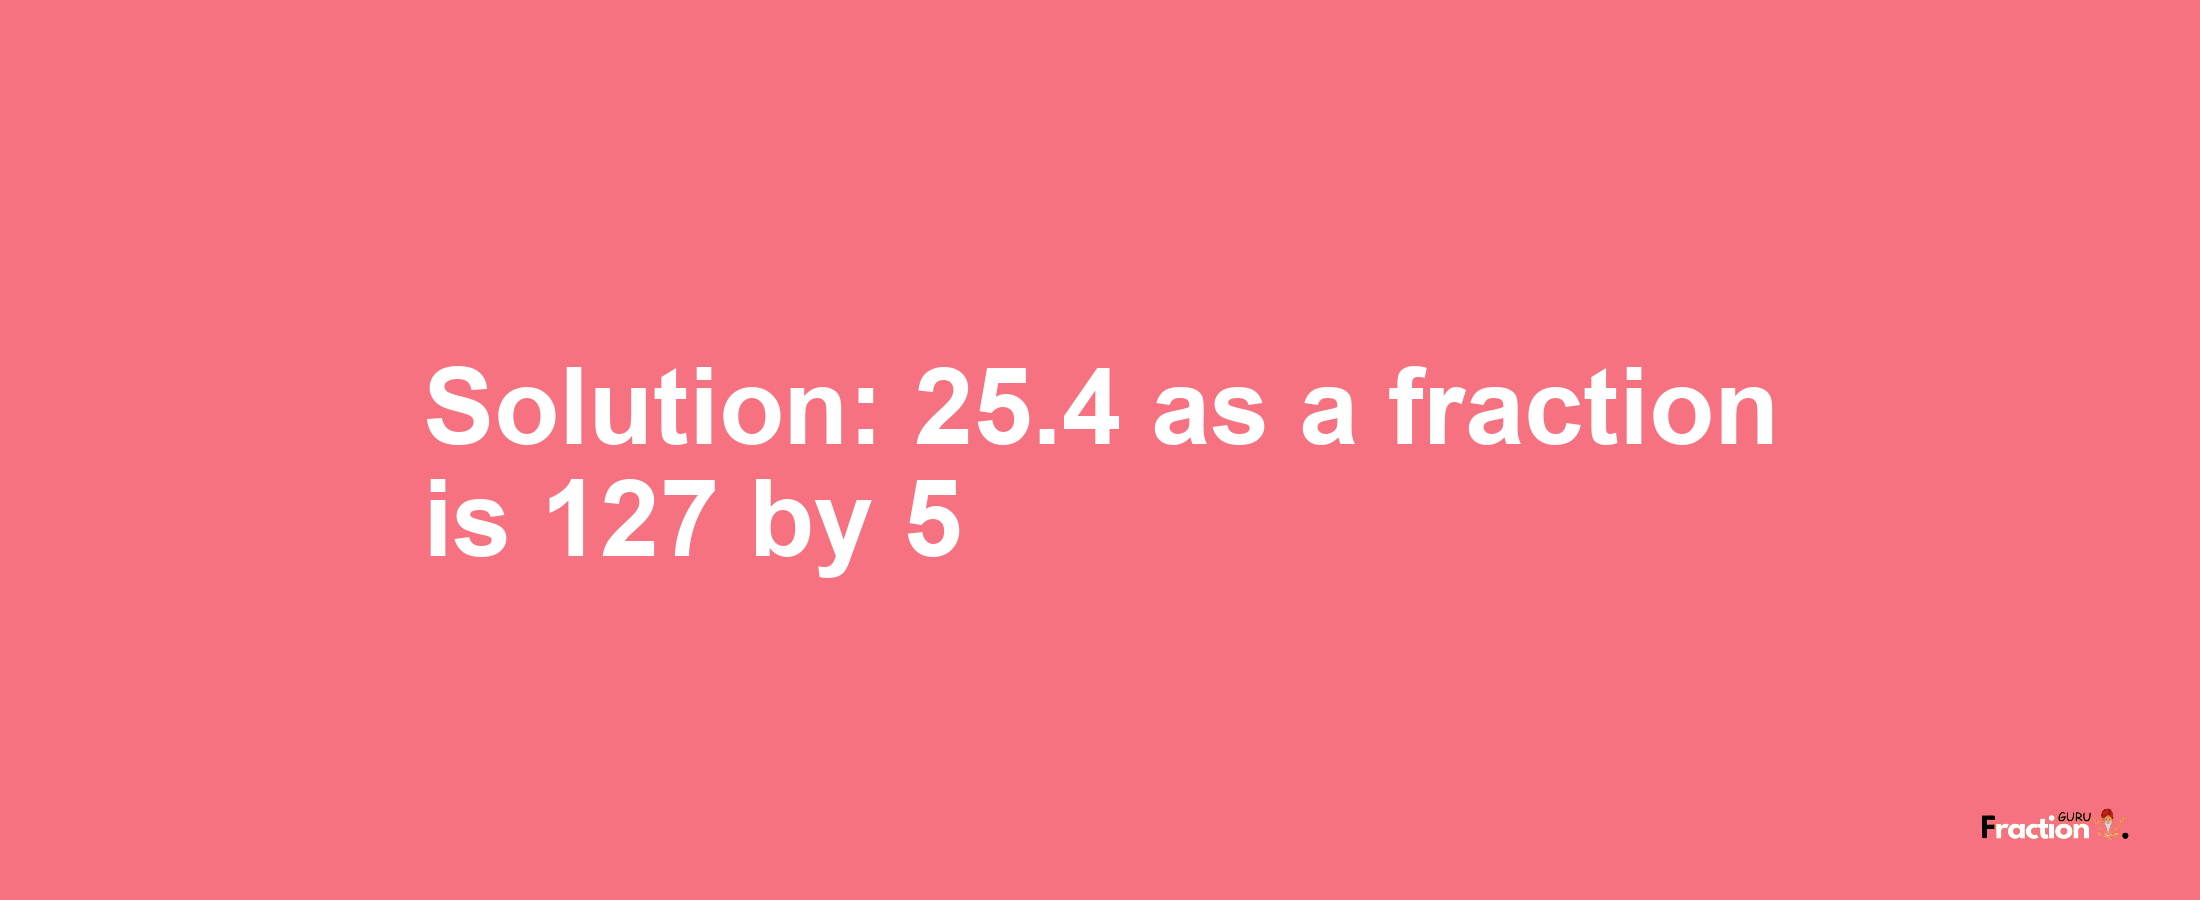 Solution:25.4 as a fraction is 127/5